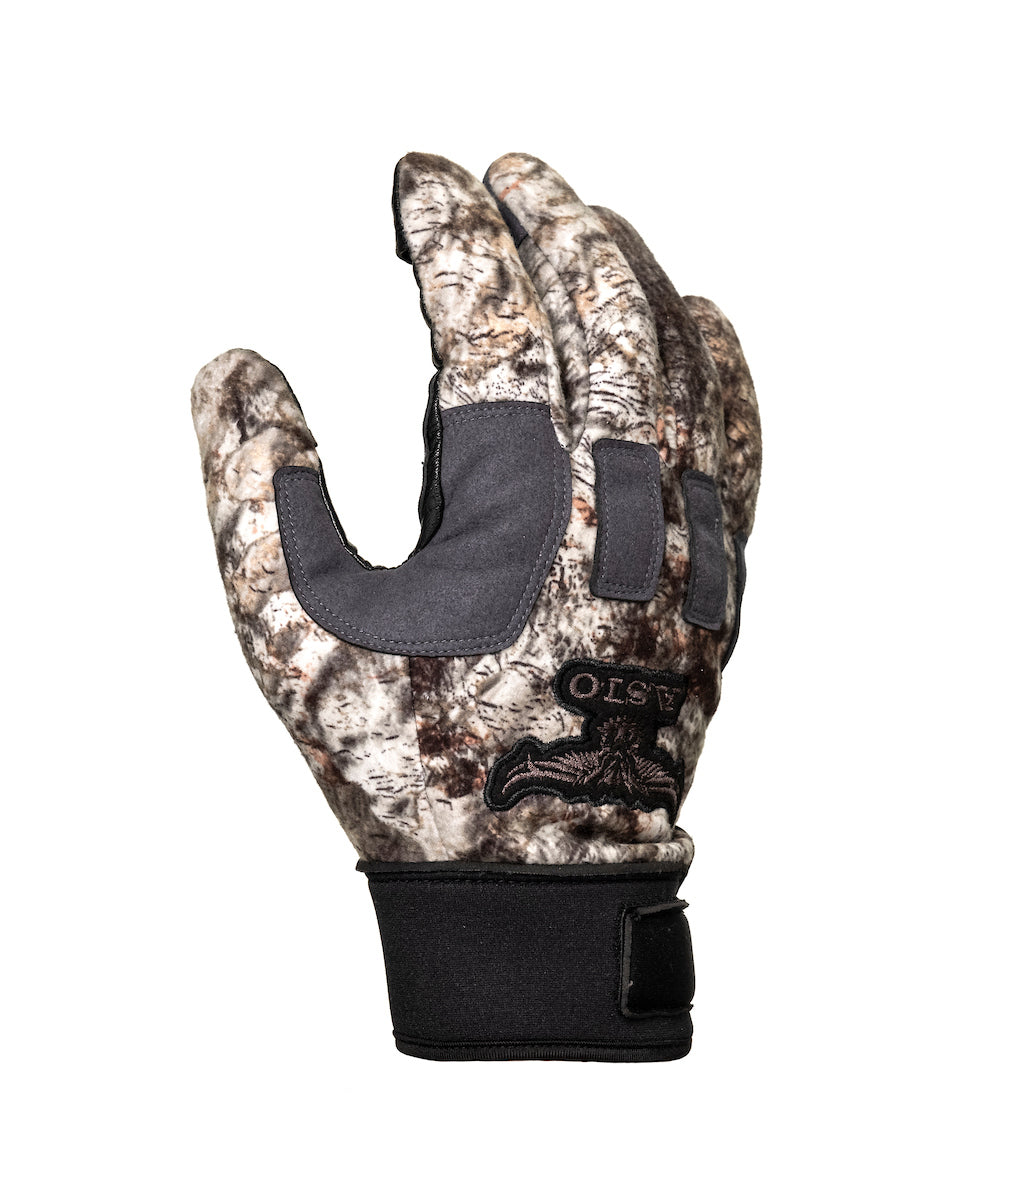 Lightweight Shooters Glove, Camo Hunting Gloves